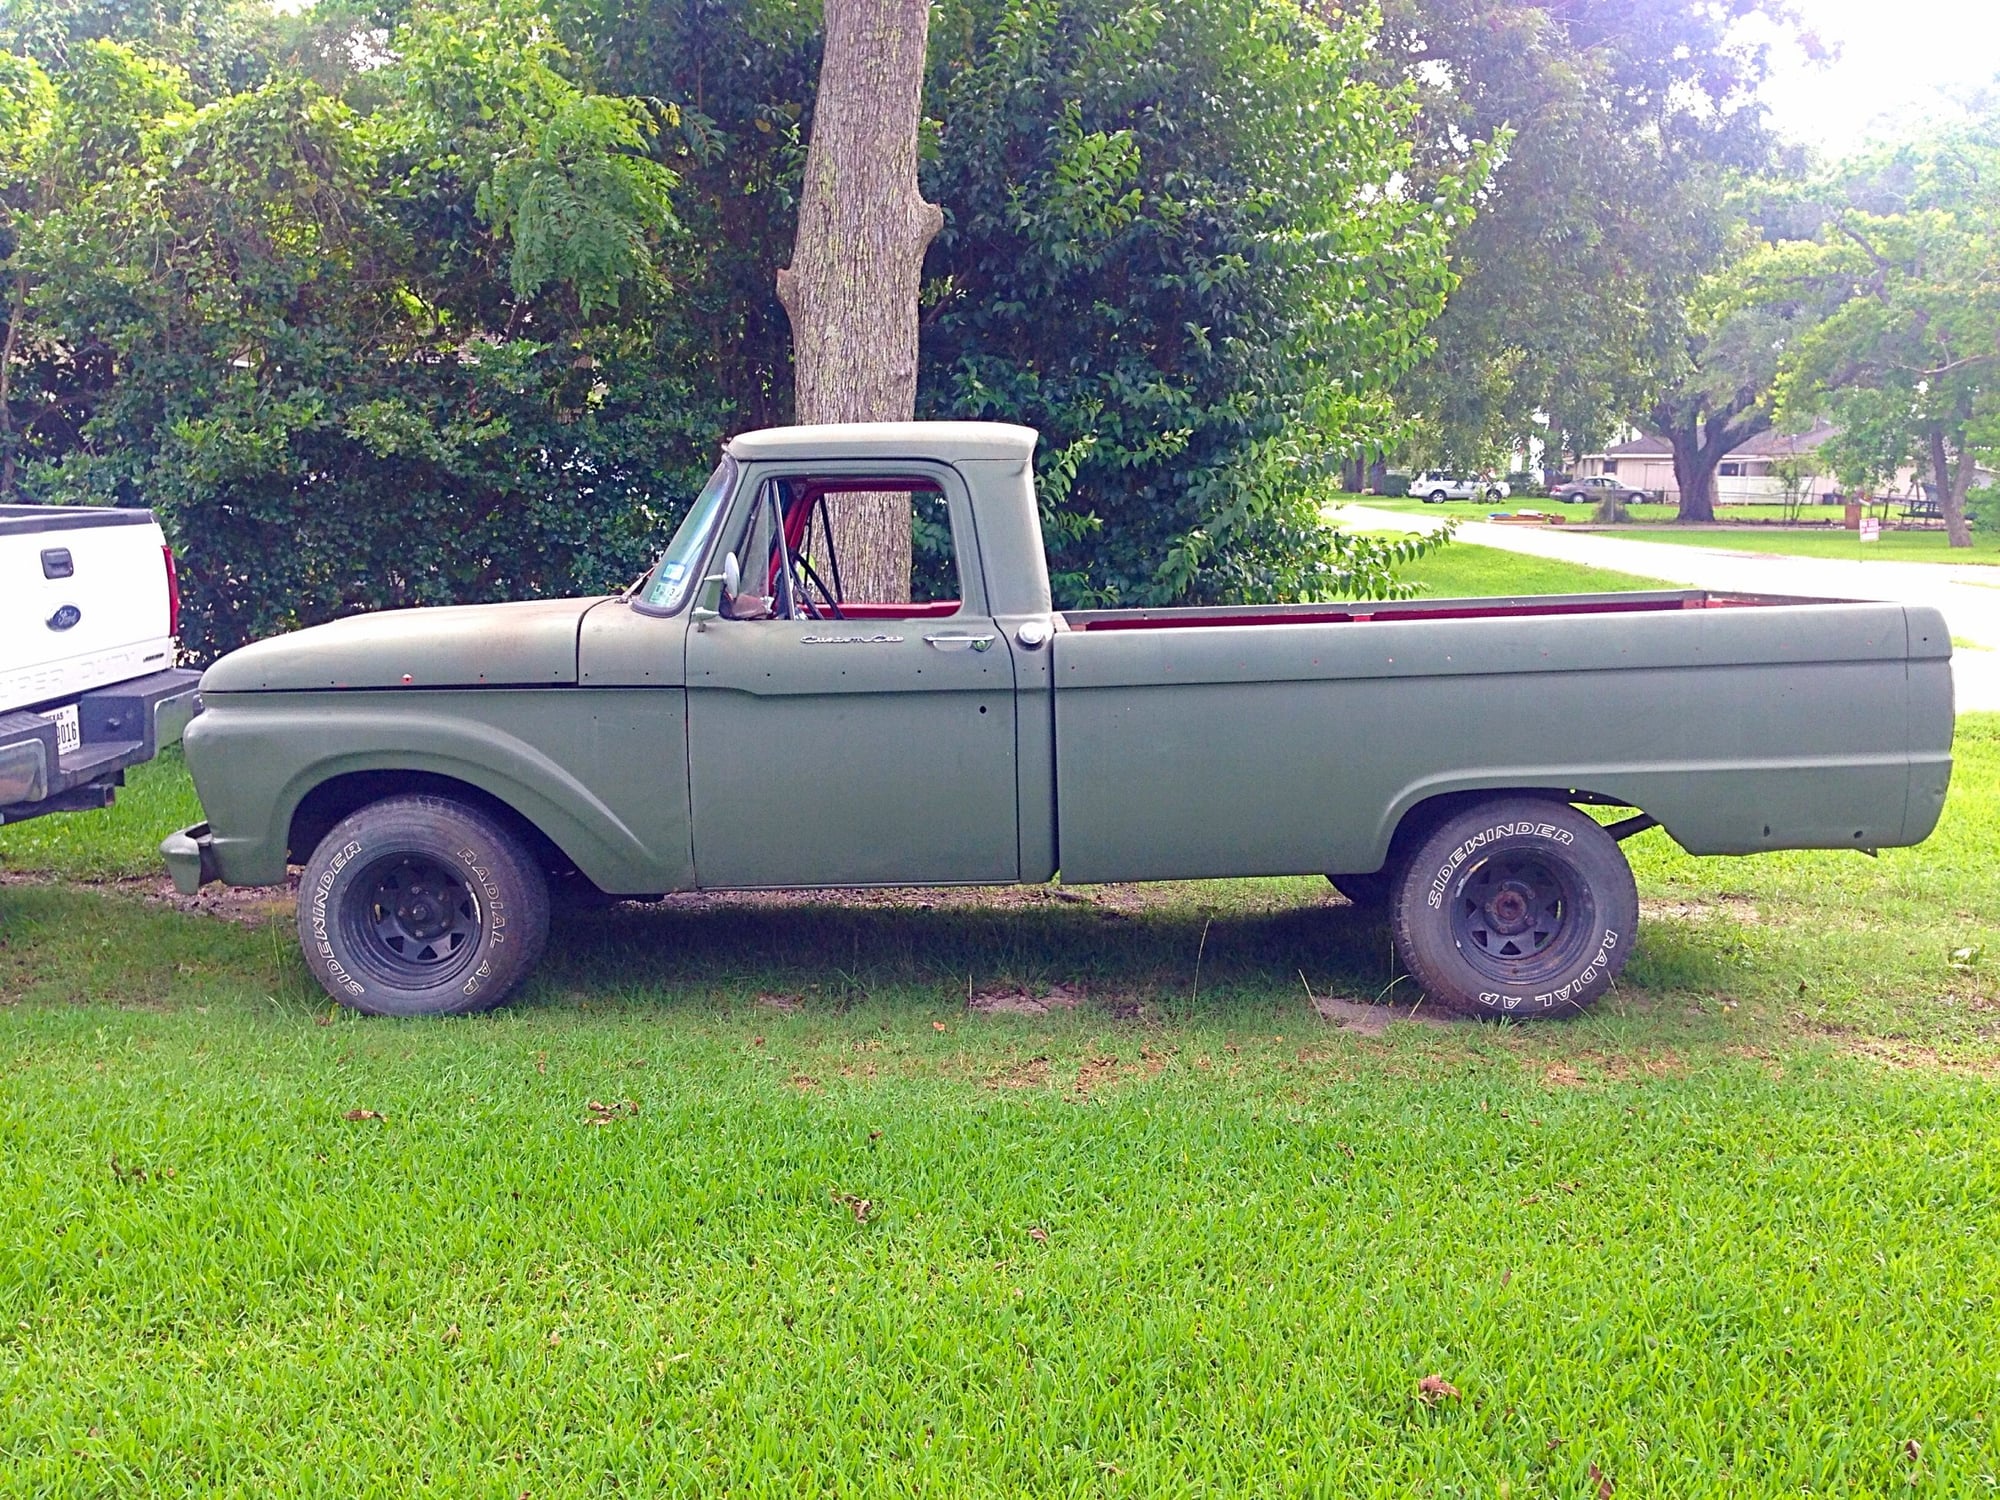 1965 Ford F-100 - 1965 f100 long bed project for sale - Used - VIN JH4DA3441JS029234 - 8 cyl - 2WD - Manual - Truck - Lake Jackson, TX 77566, United States